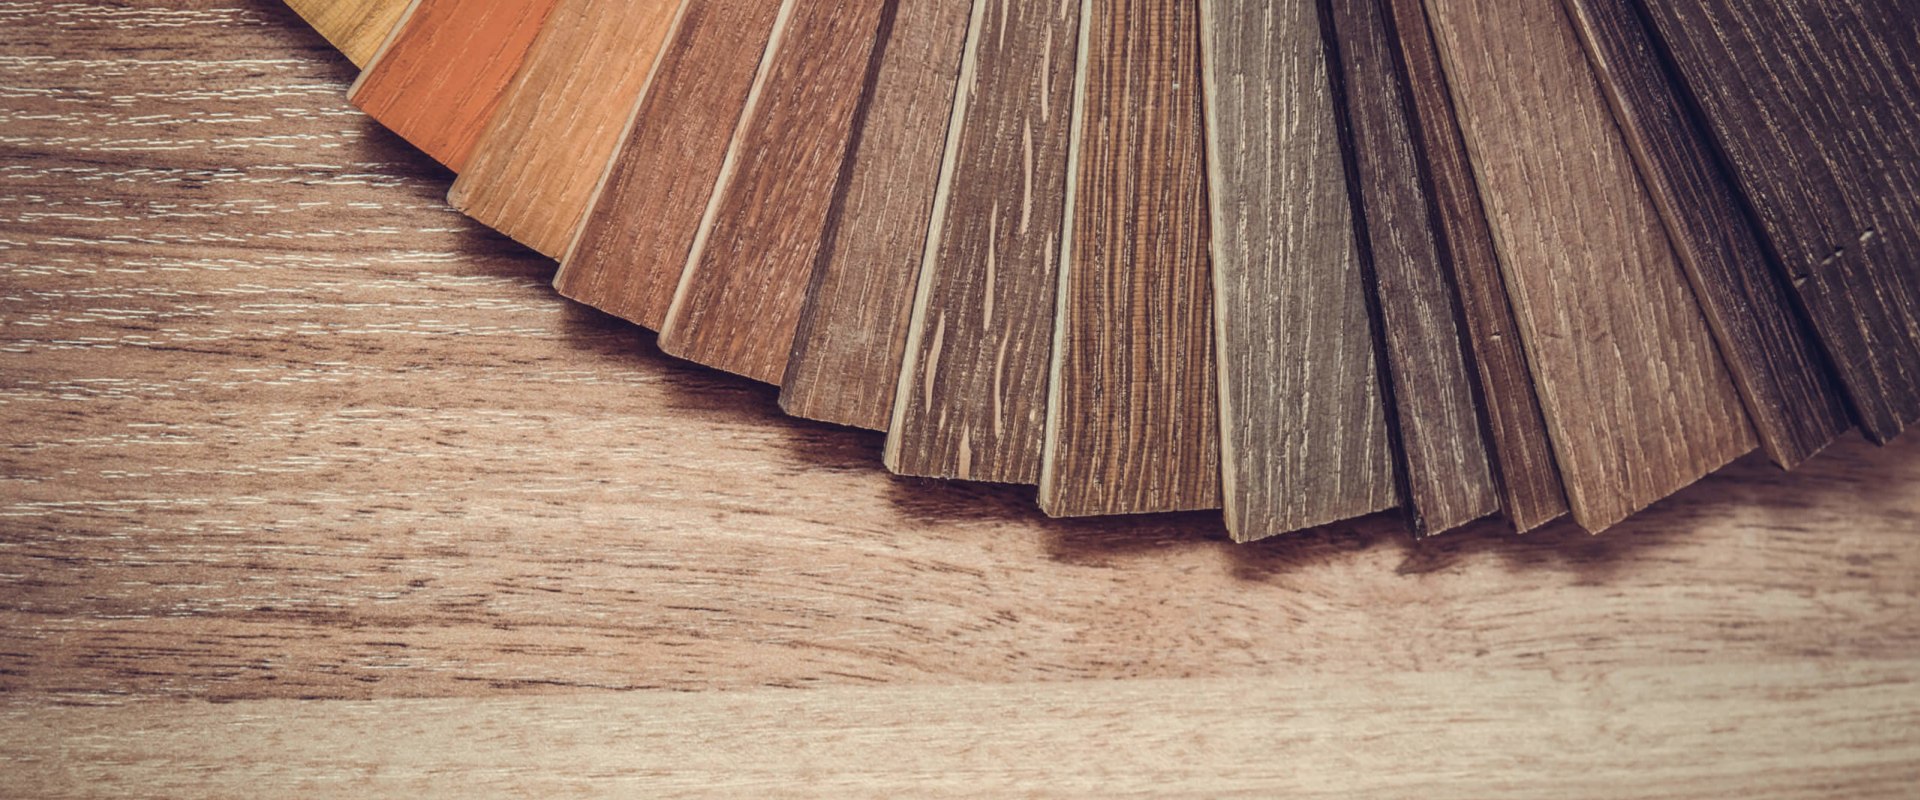 Which hardwood flooring is the hardest?